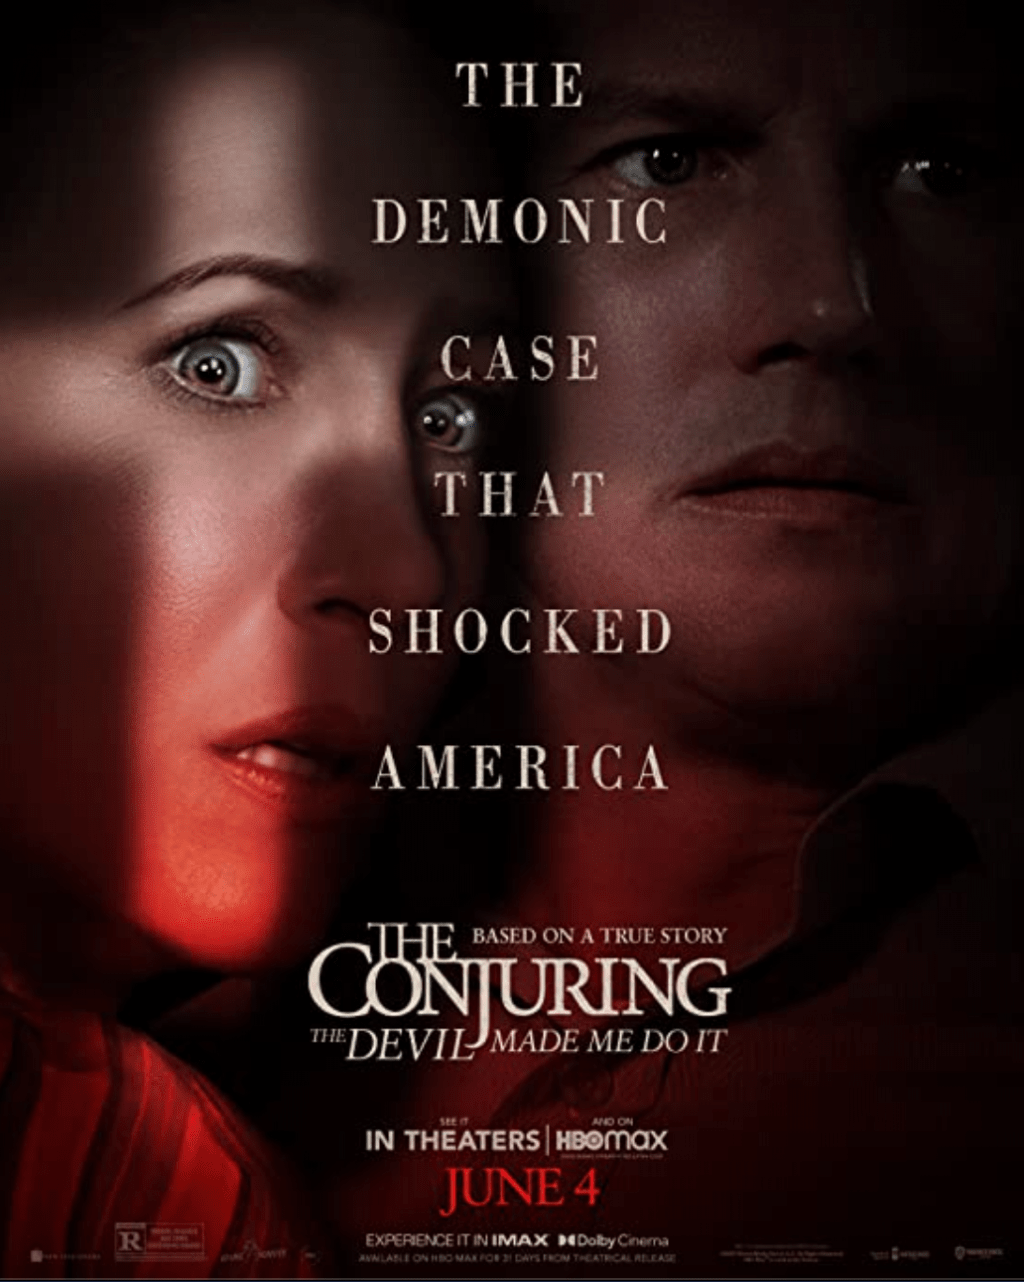 The official poster for "The Conjuring: The Devil Made Me Do It" shows Patrick Wilson and Vera Farmiga as Ed and Lorraine Warren, the stars of the franchise. As indicated by the poster, the events in the film were loosely based on a case of demonic possession recorded by the actual Warrens. Photo Courtesy of Warner Bros. Pictures